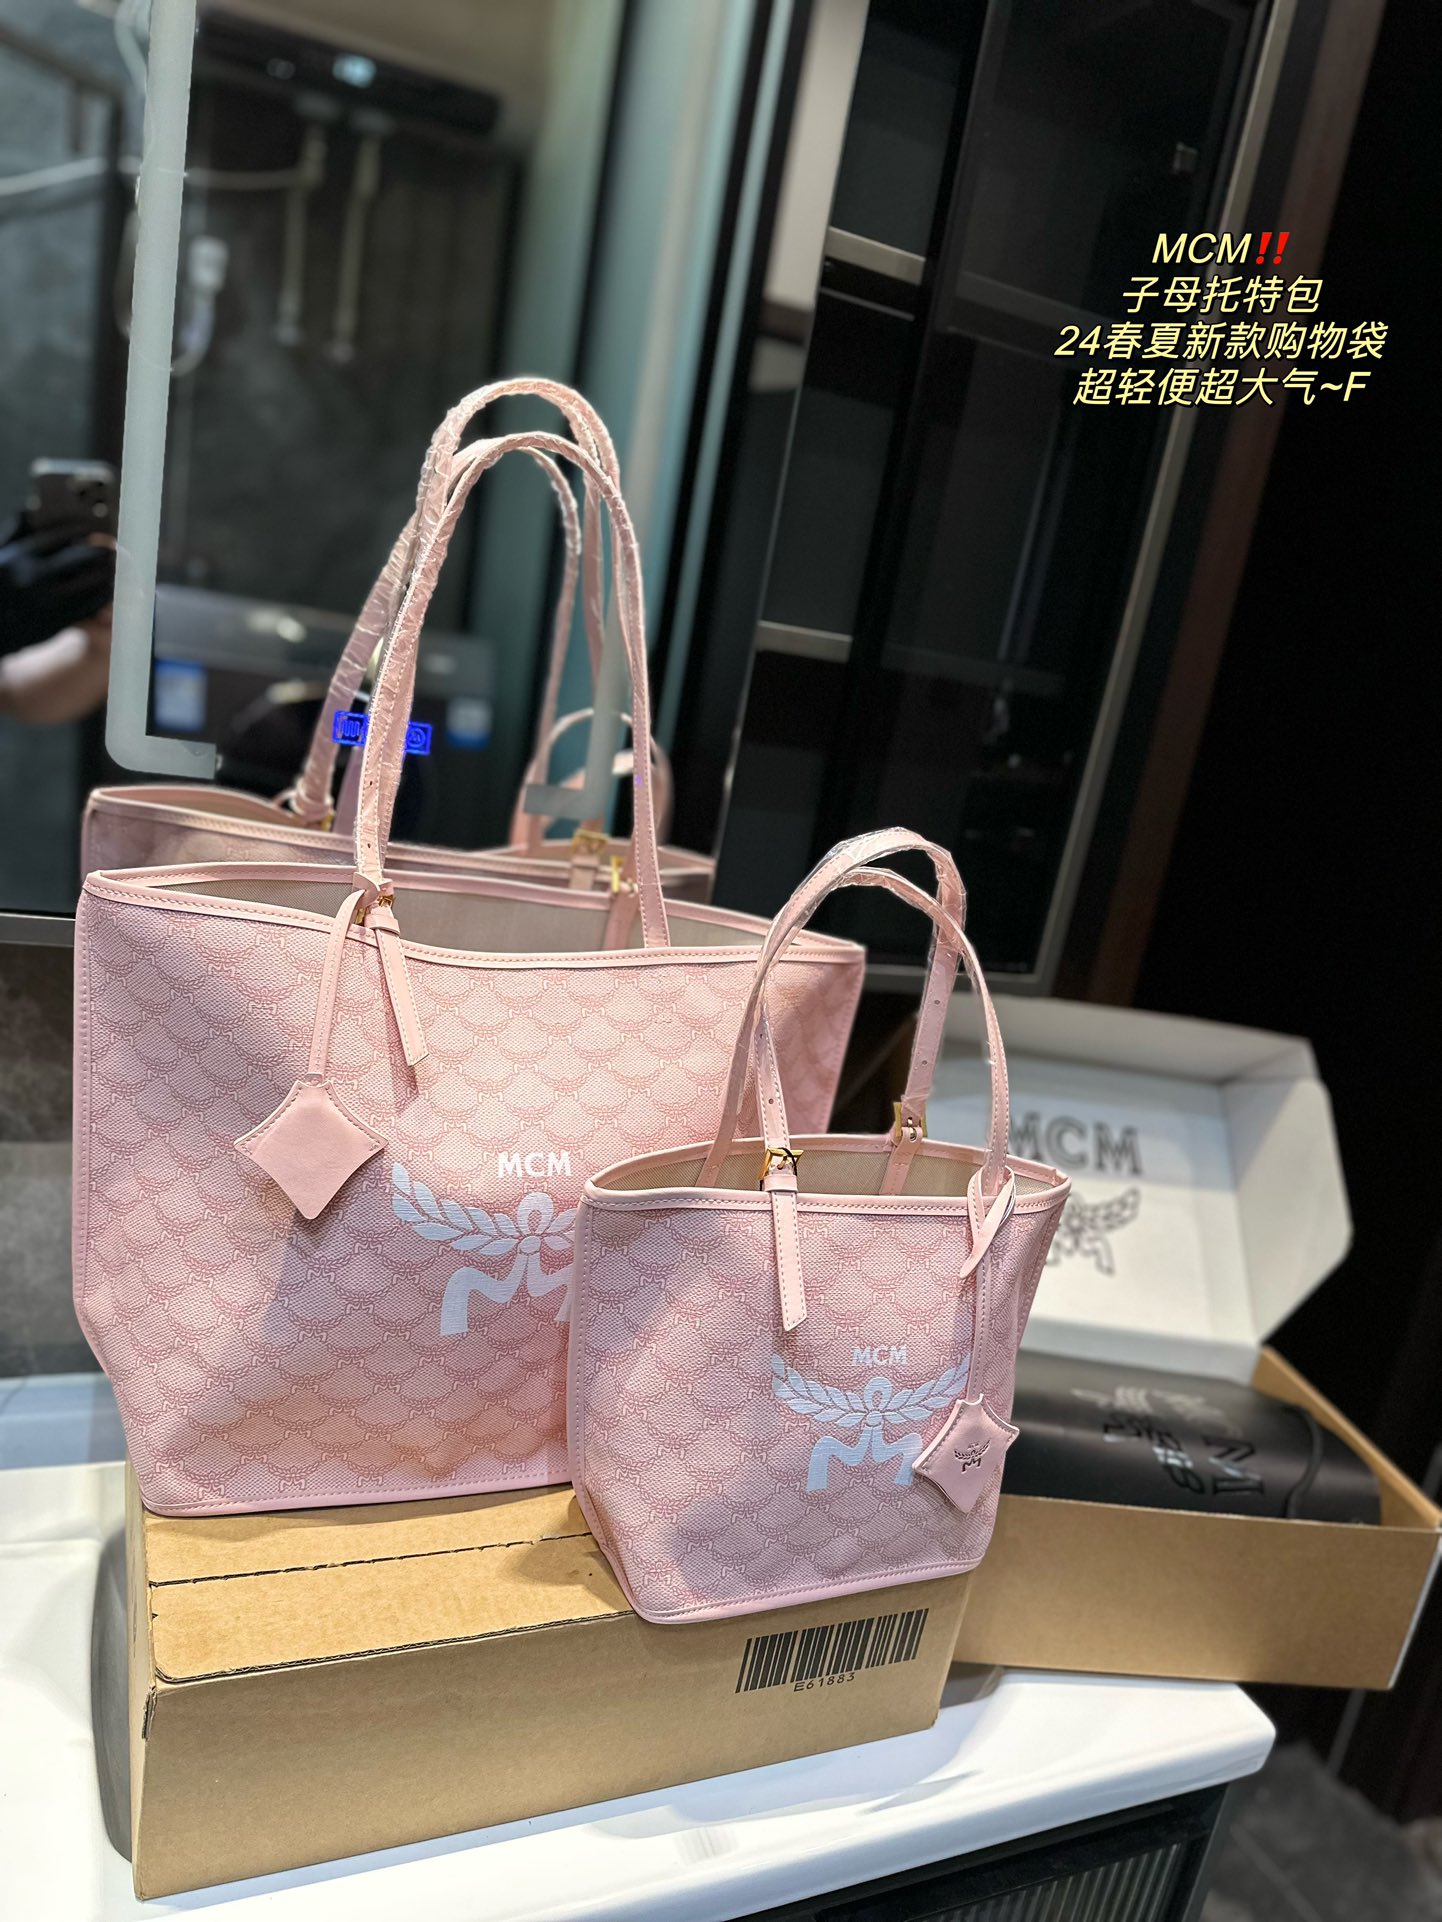 MCM Handbags Tote Bags Spring/Summer Collection